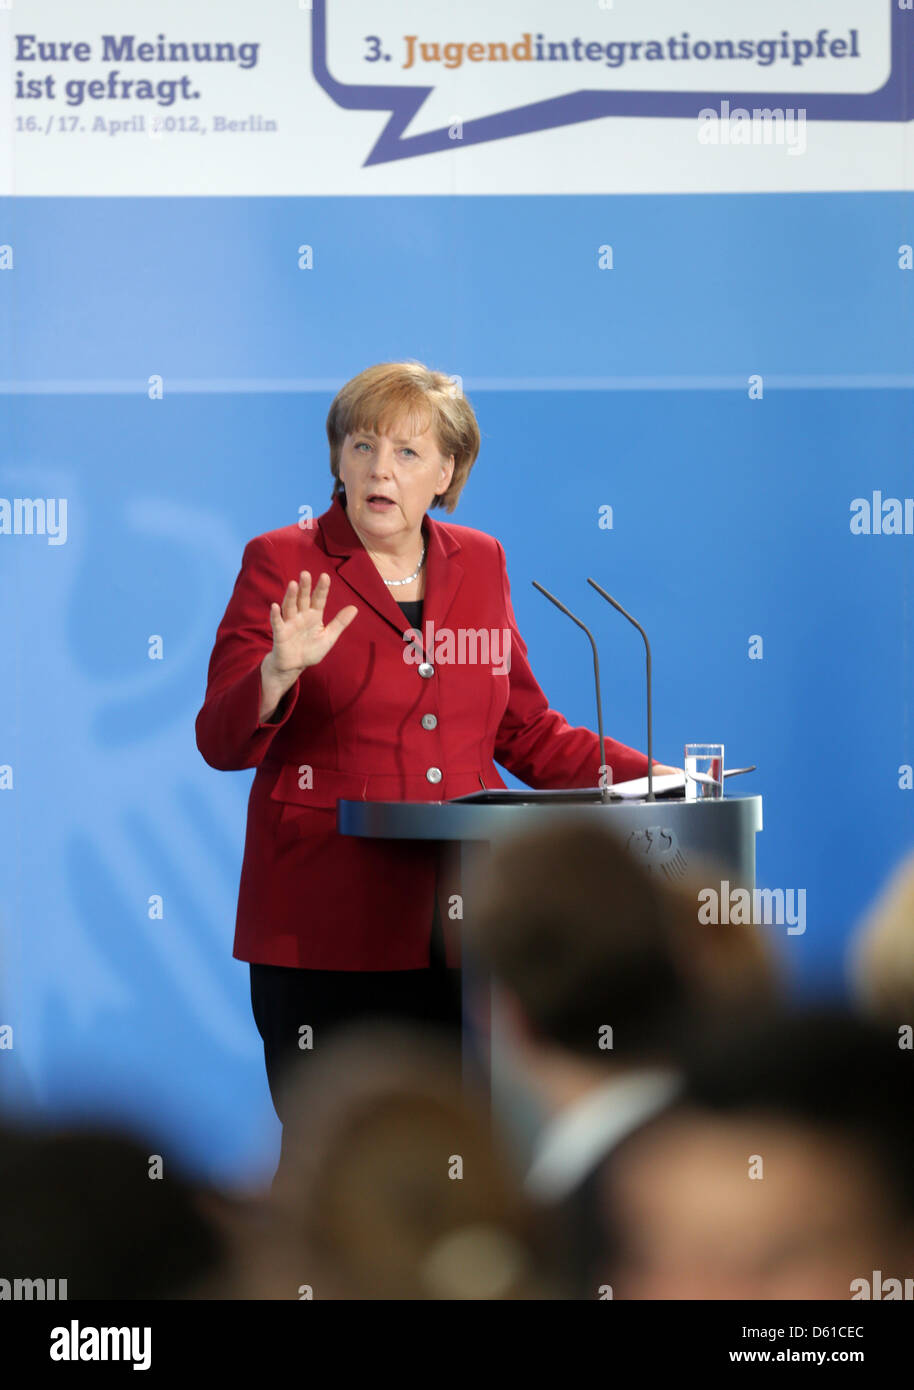 German Chancellor Angela Merkel attends the third Youth Integration Summit on the social integration of immigrants and theird children at the Chancellery in Berlin, Germany, 16 April 2012. Photo: KAY NIETFELD Stock Photo